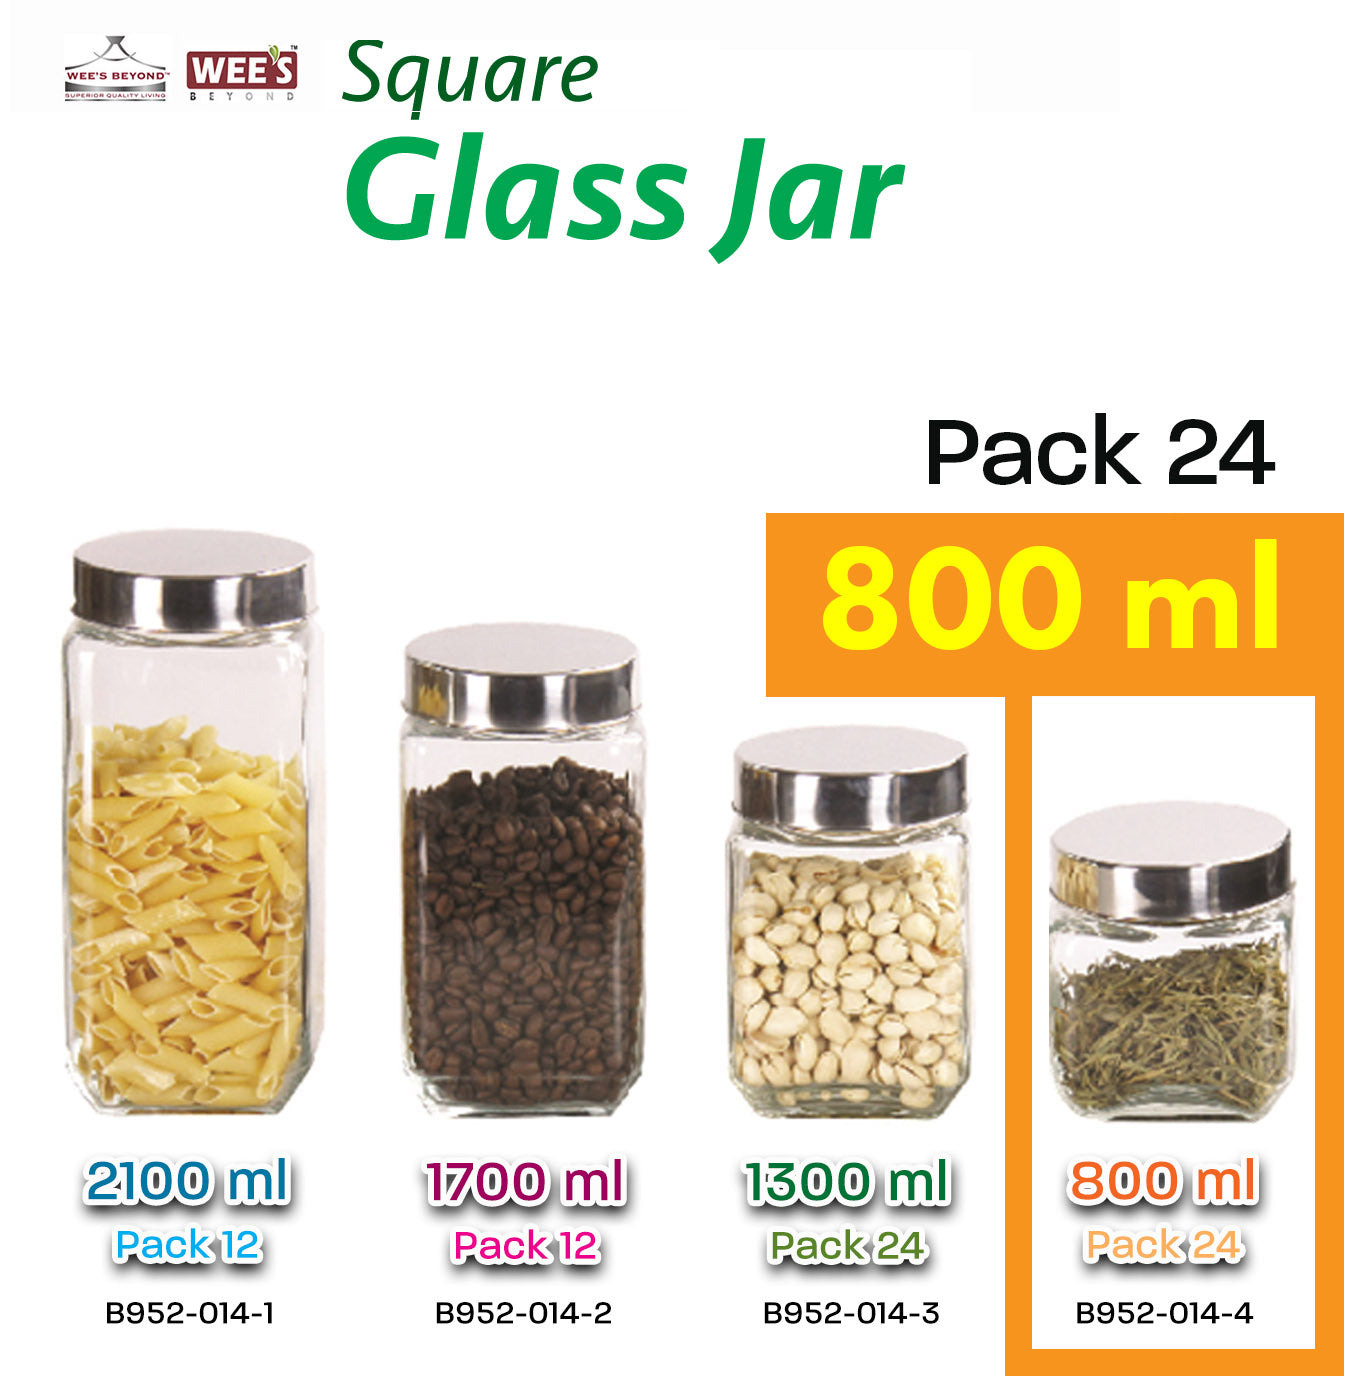 24ea - 7 Oz Square Glass Jar With Lid | Width: 2 3/4